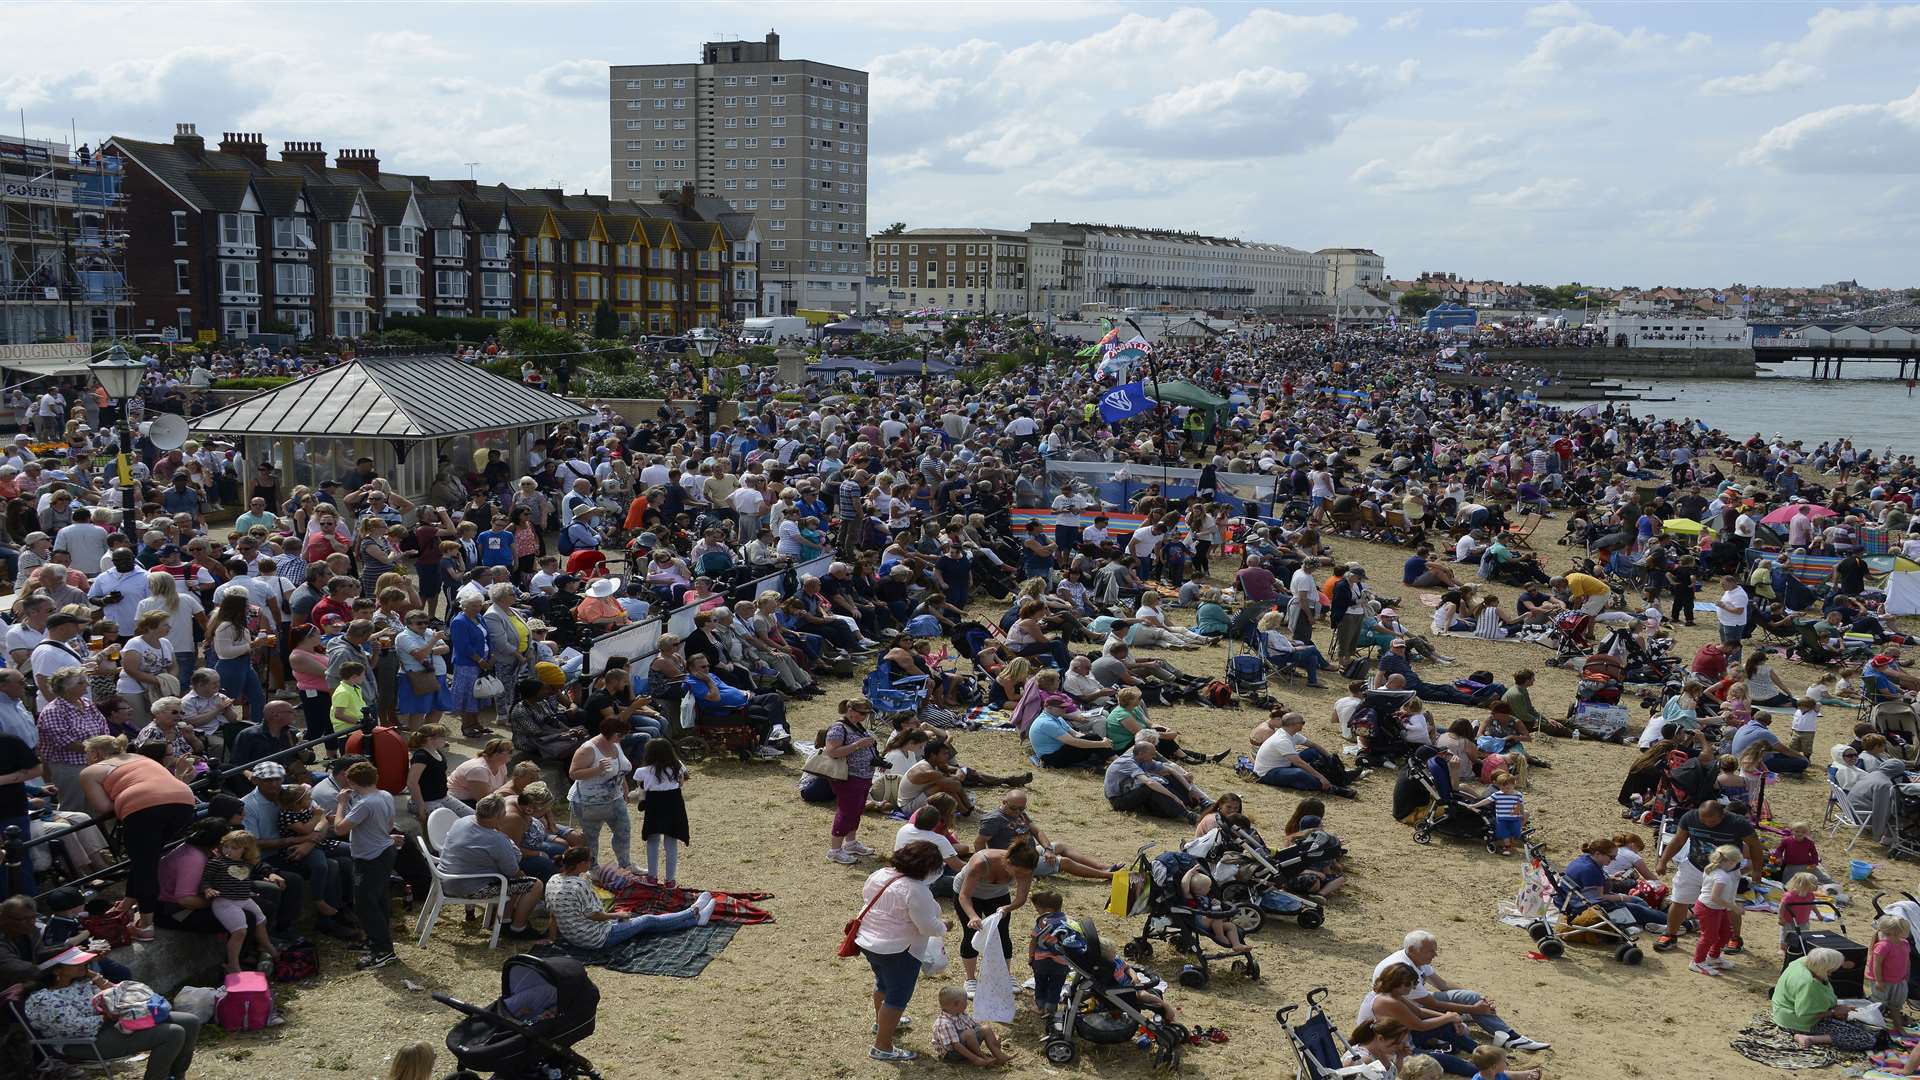 Last year 70,000 people lined the seafront. Picture: Paul Amos